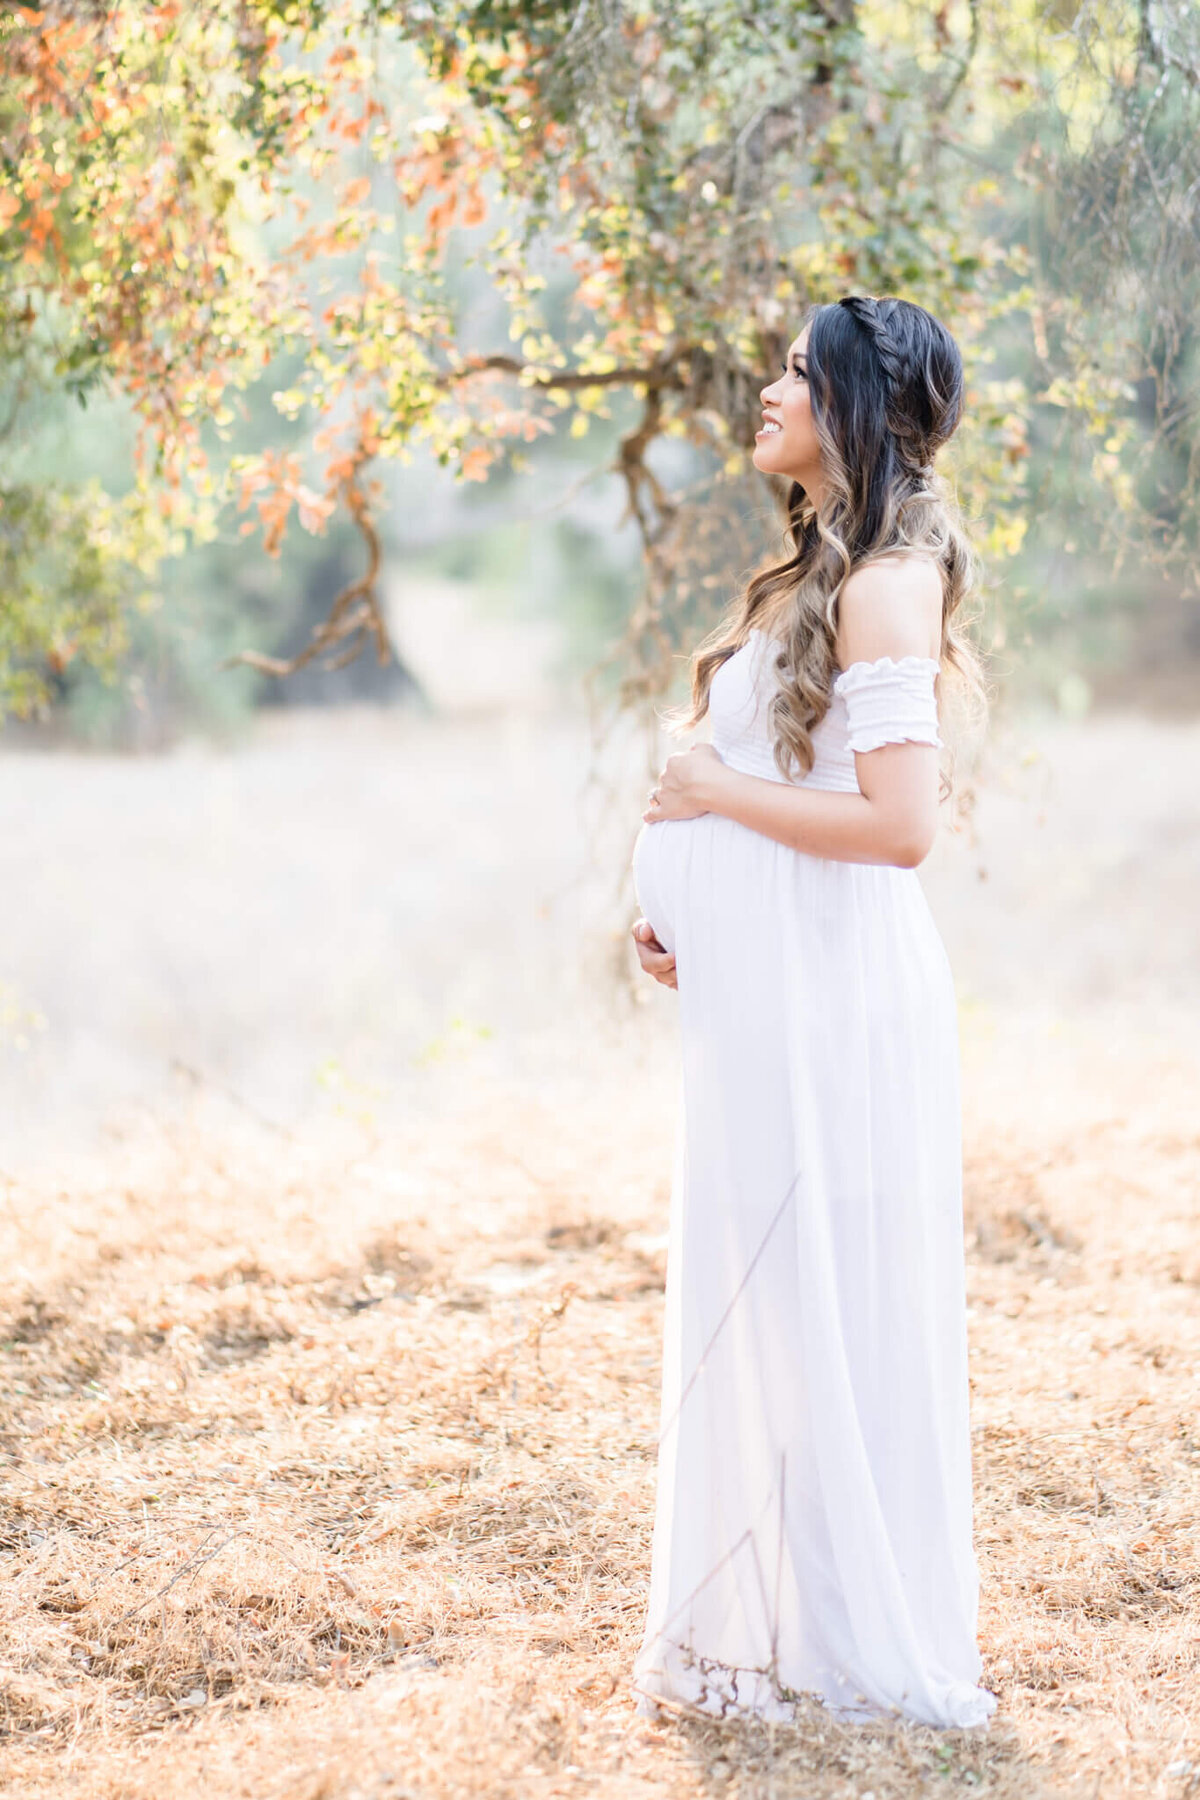 Pregnant mom holding pregnant belly under autumn tree leaves with crown braid in her hair and loose waves. Maternity inspo photo by Orange County Maternity Photographer Melliemade Photography